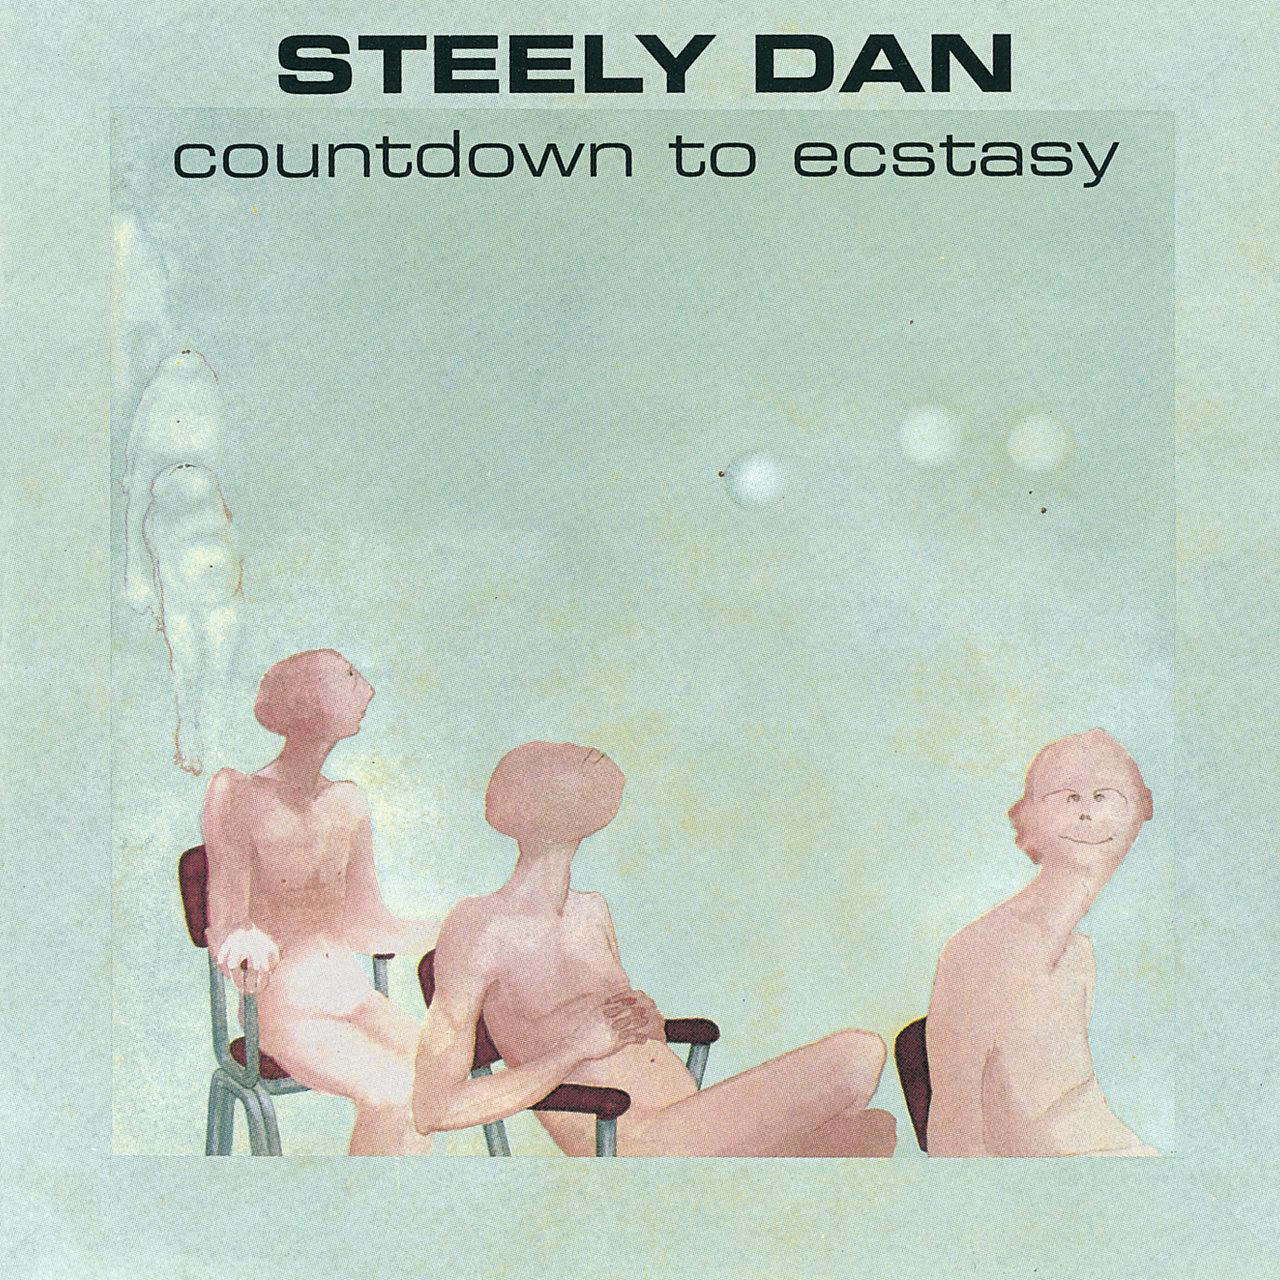 .While we're on the topic of Steely Dan, wanted to talk about this record which I've also been getting into. I feel like Steely Dan is a band that takes some effort at times to get into. But this record hooks you pretty well with the first tune Bodhisattva which has a great blues groove going. I think this record is where the Steely sound really begins to develop into the more jazzy-rock sound that you hear on Aja and Gaucho. Walter Becker has some great guitar runs on this record. Favorites on this one are My Old School, Your Gold Teeth and Pearl of the Quarter